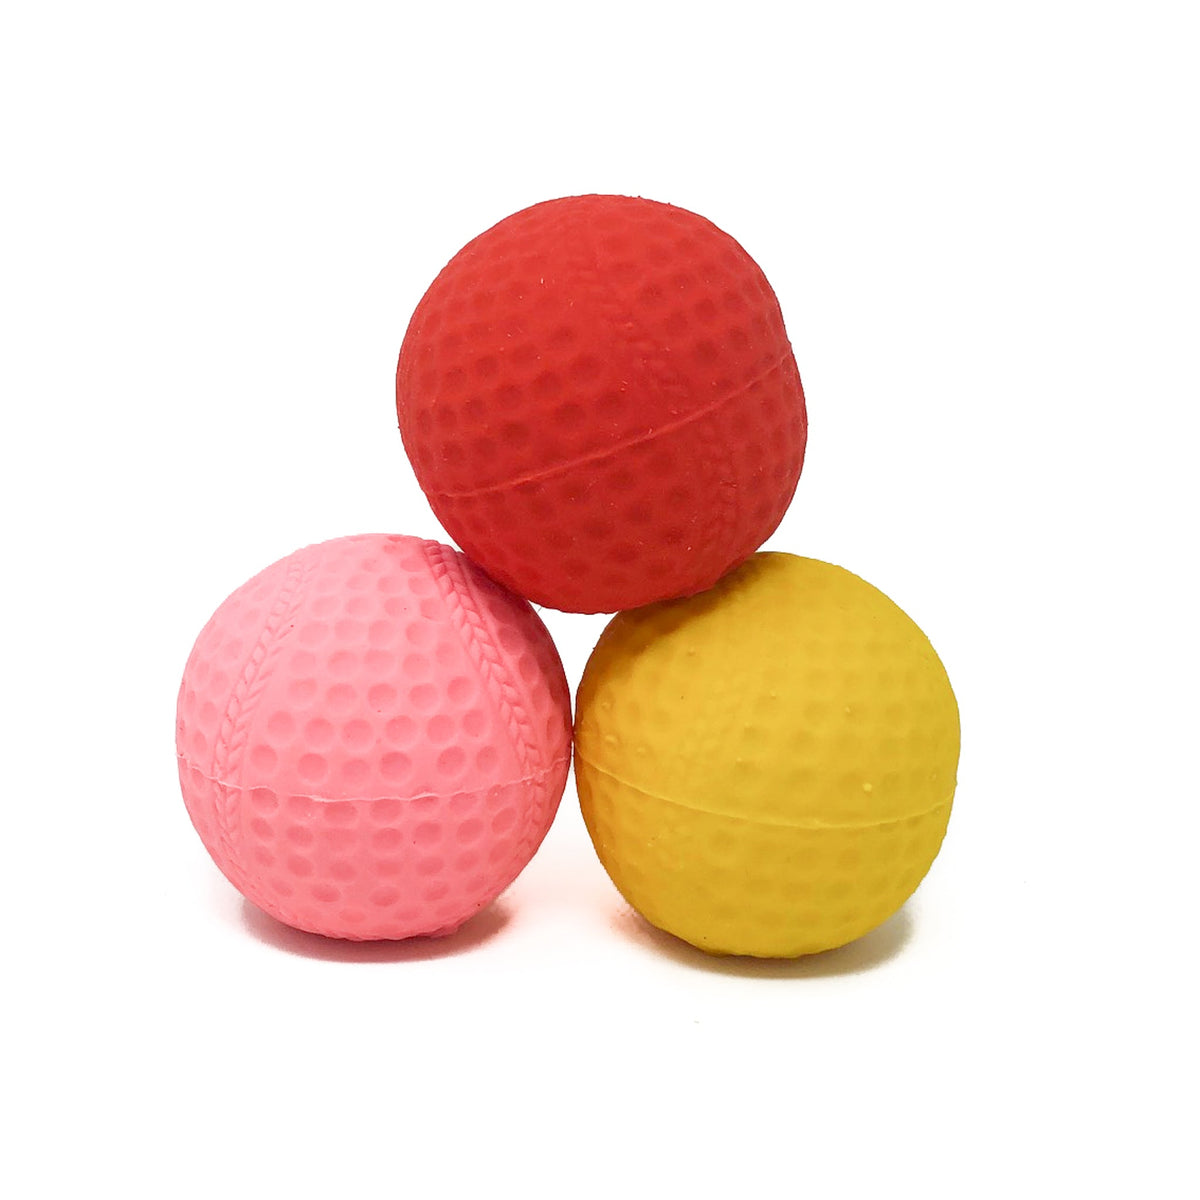 Small Ball Pet Toy - Rubber Toy For Pet | Natural Rubber Toys